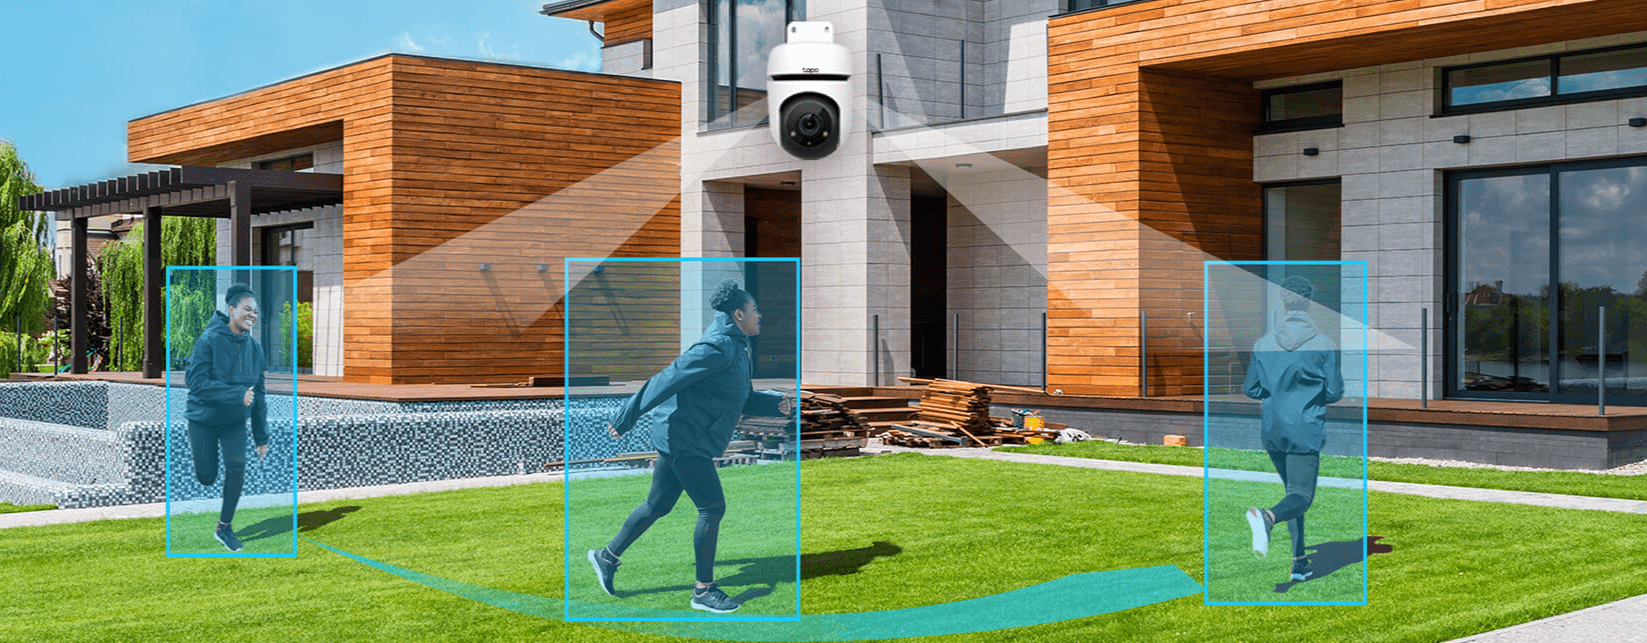 TP-Link Person Detection and Motion Tracking image